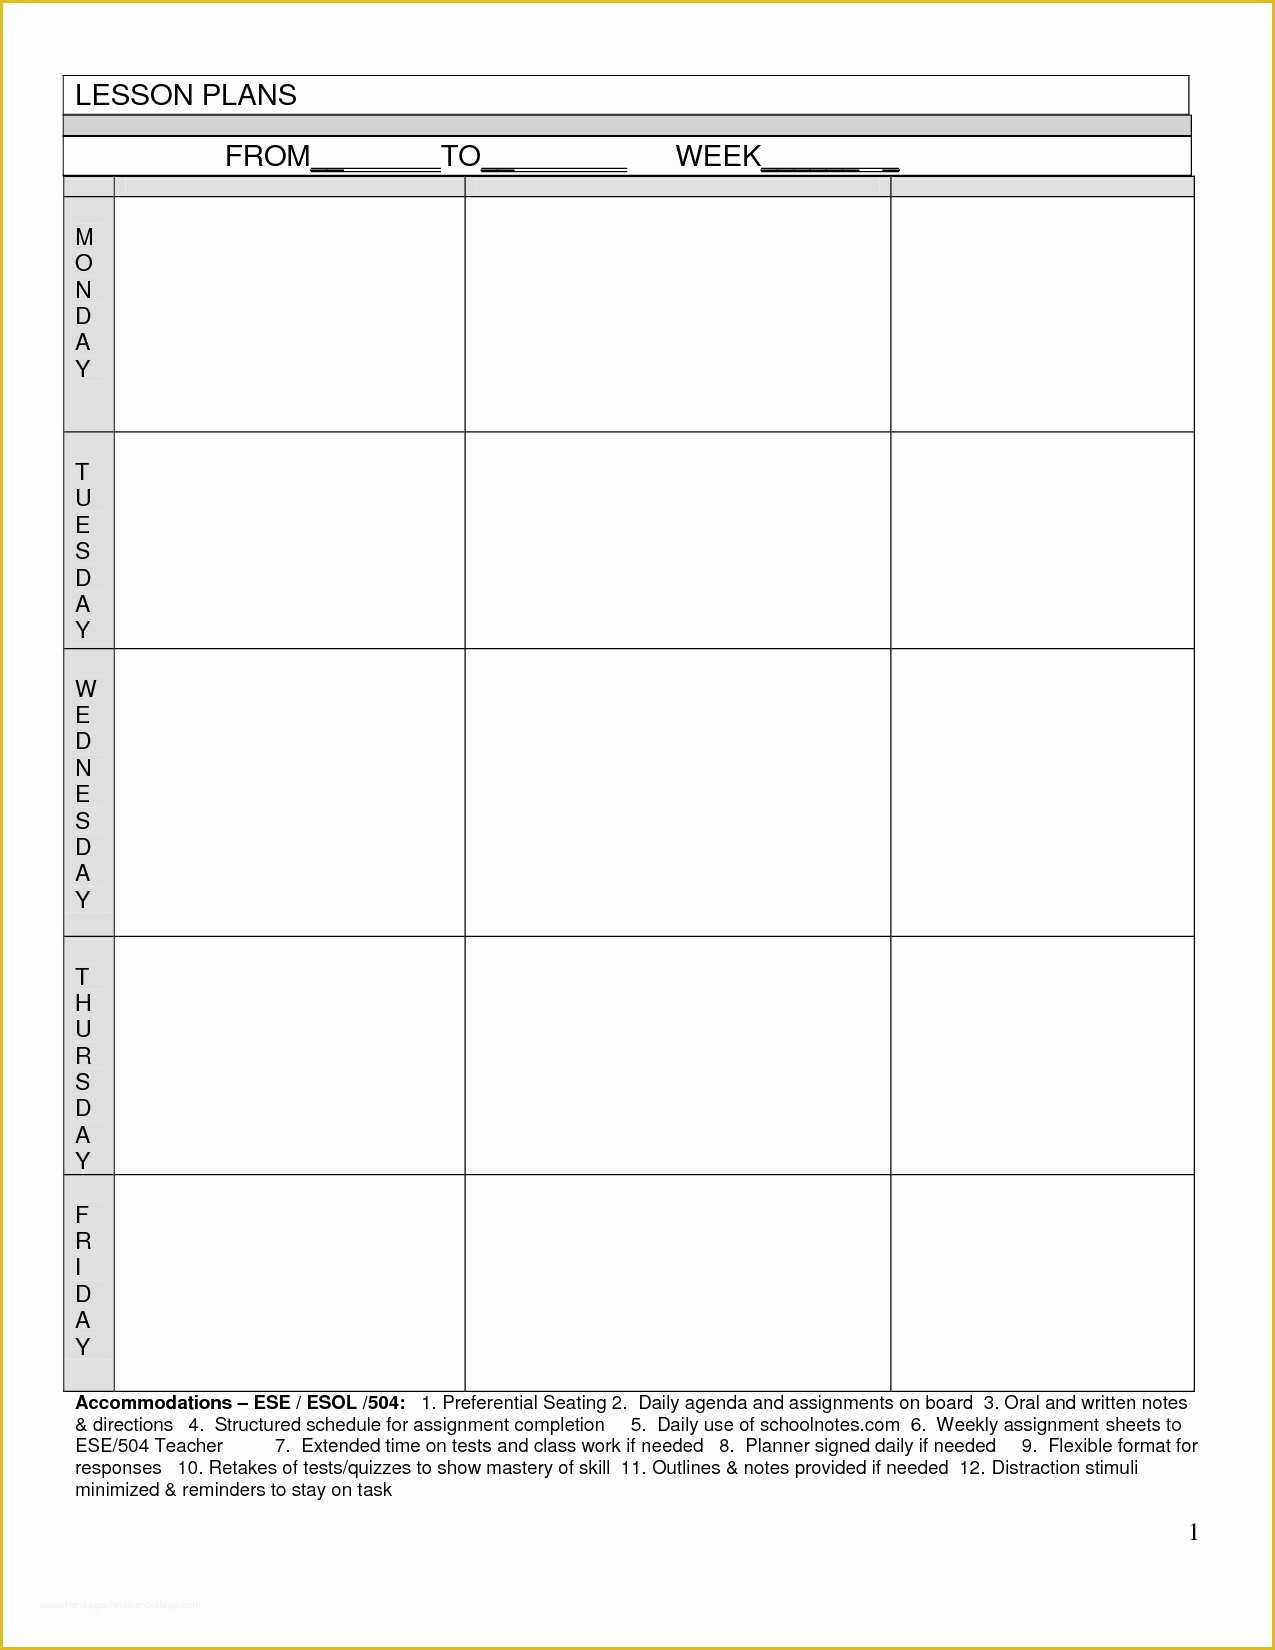 Free Printable Lesson Plan Template Blank Of Blank Lesson Plans for Teachers